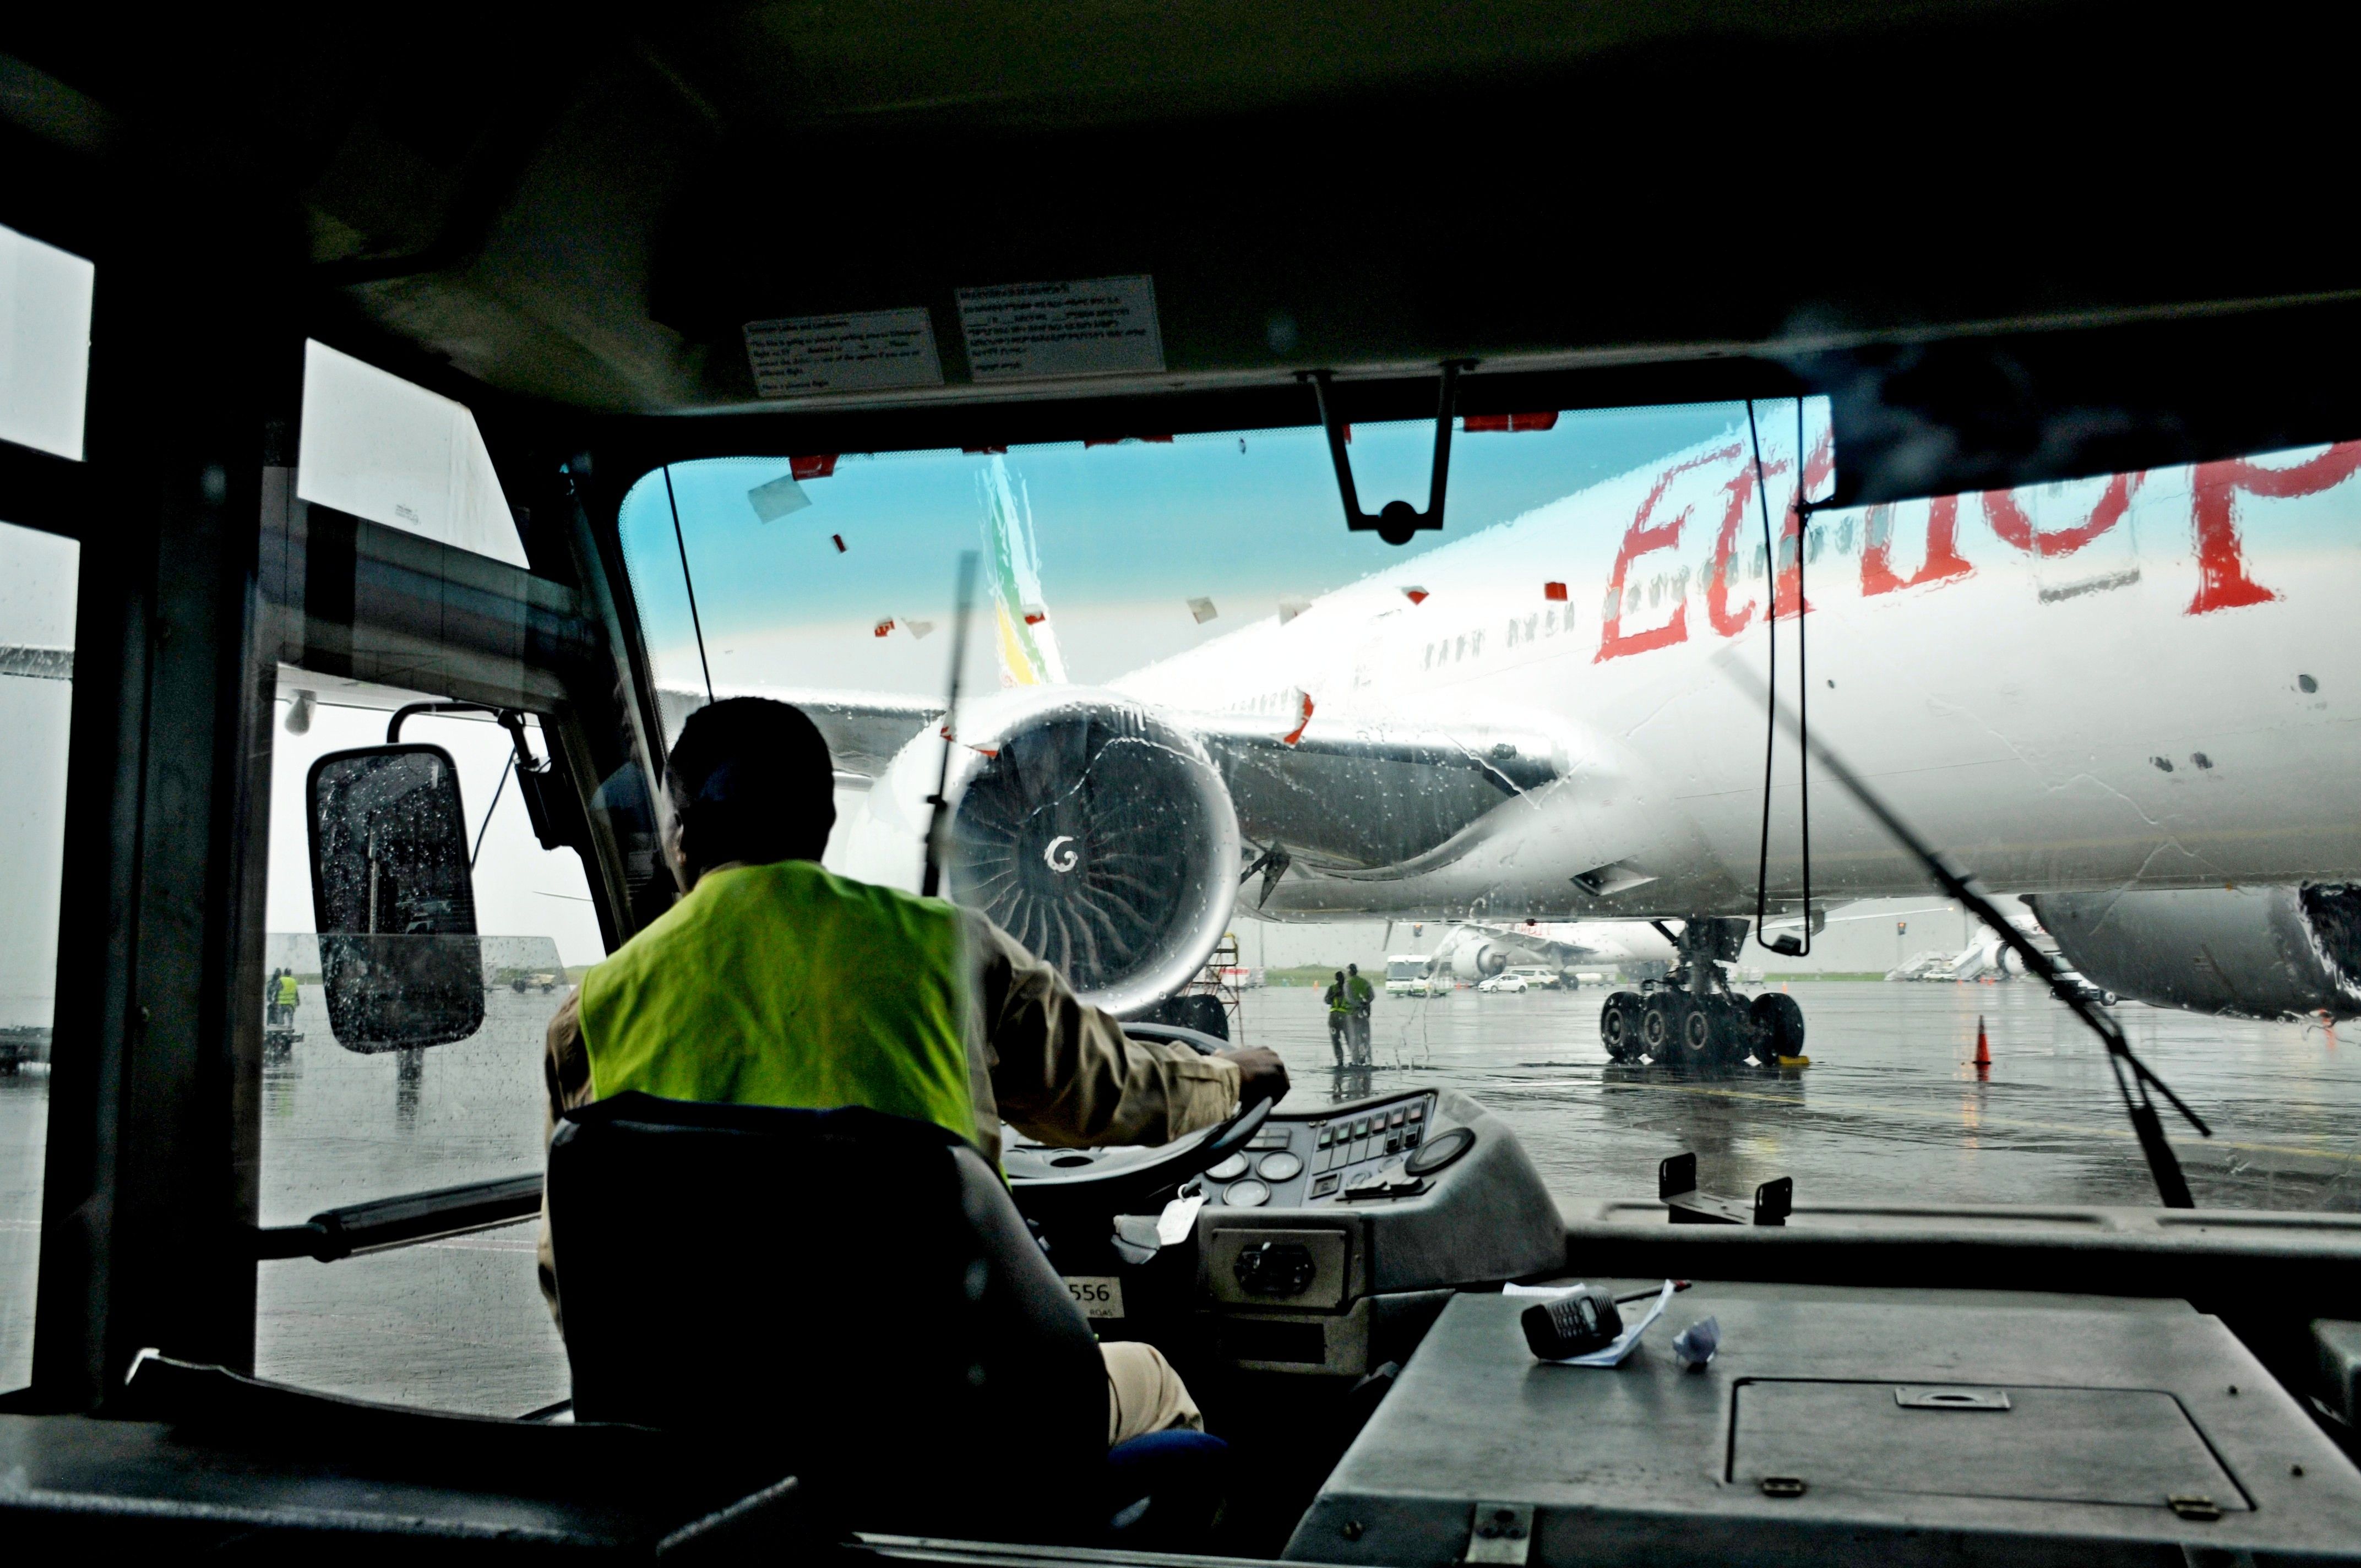 Ethiopian Airlines ground services at Addis Ababa International